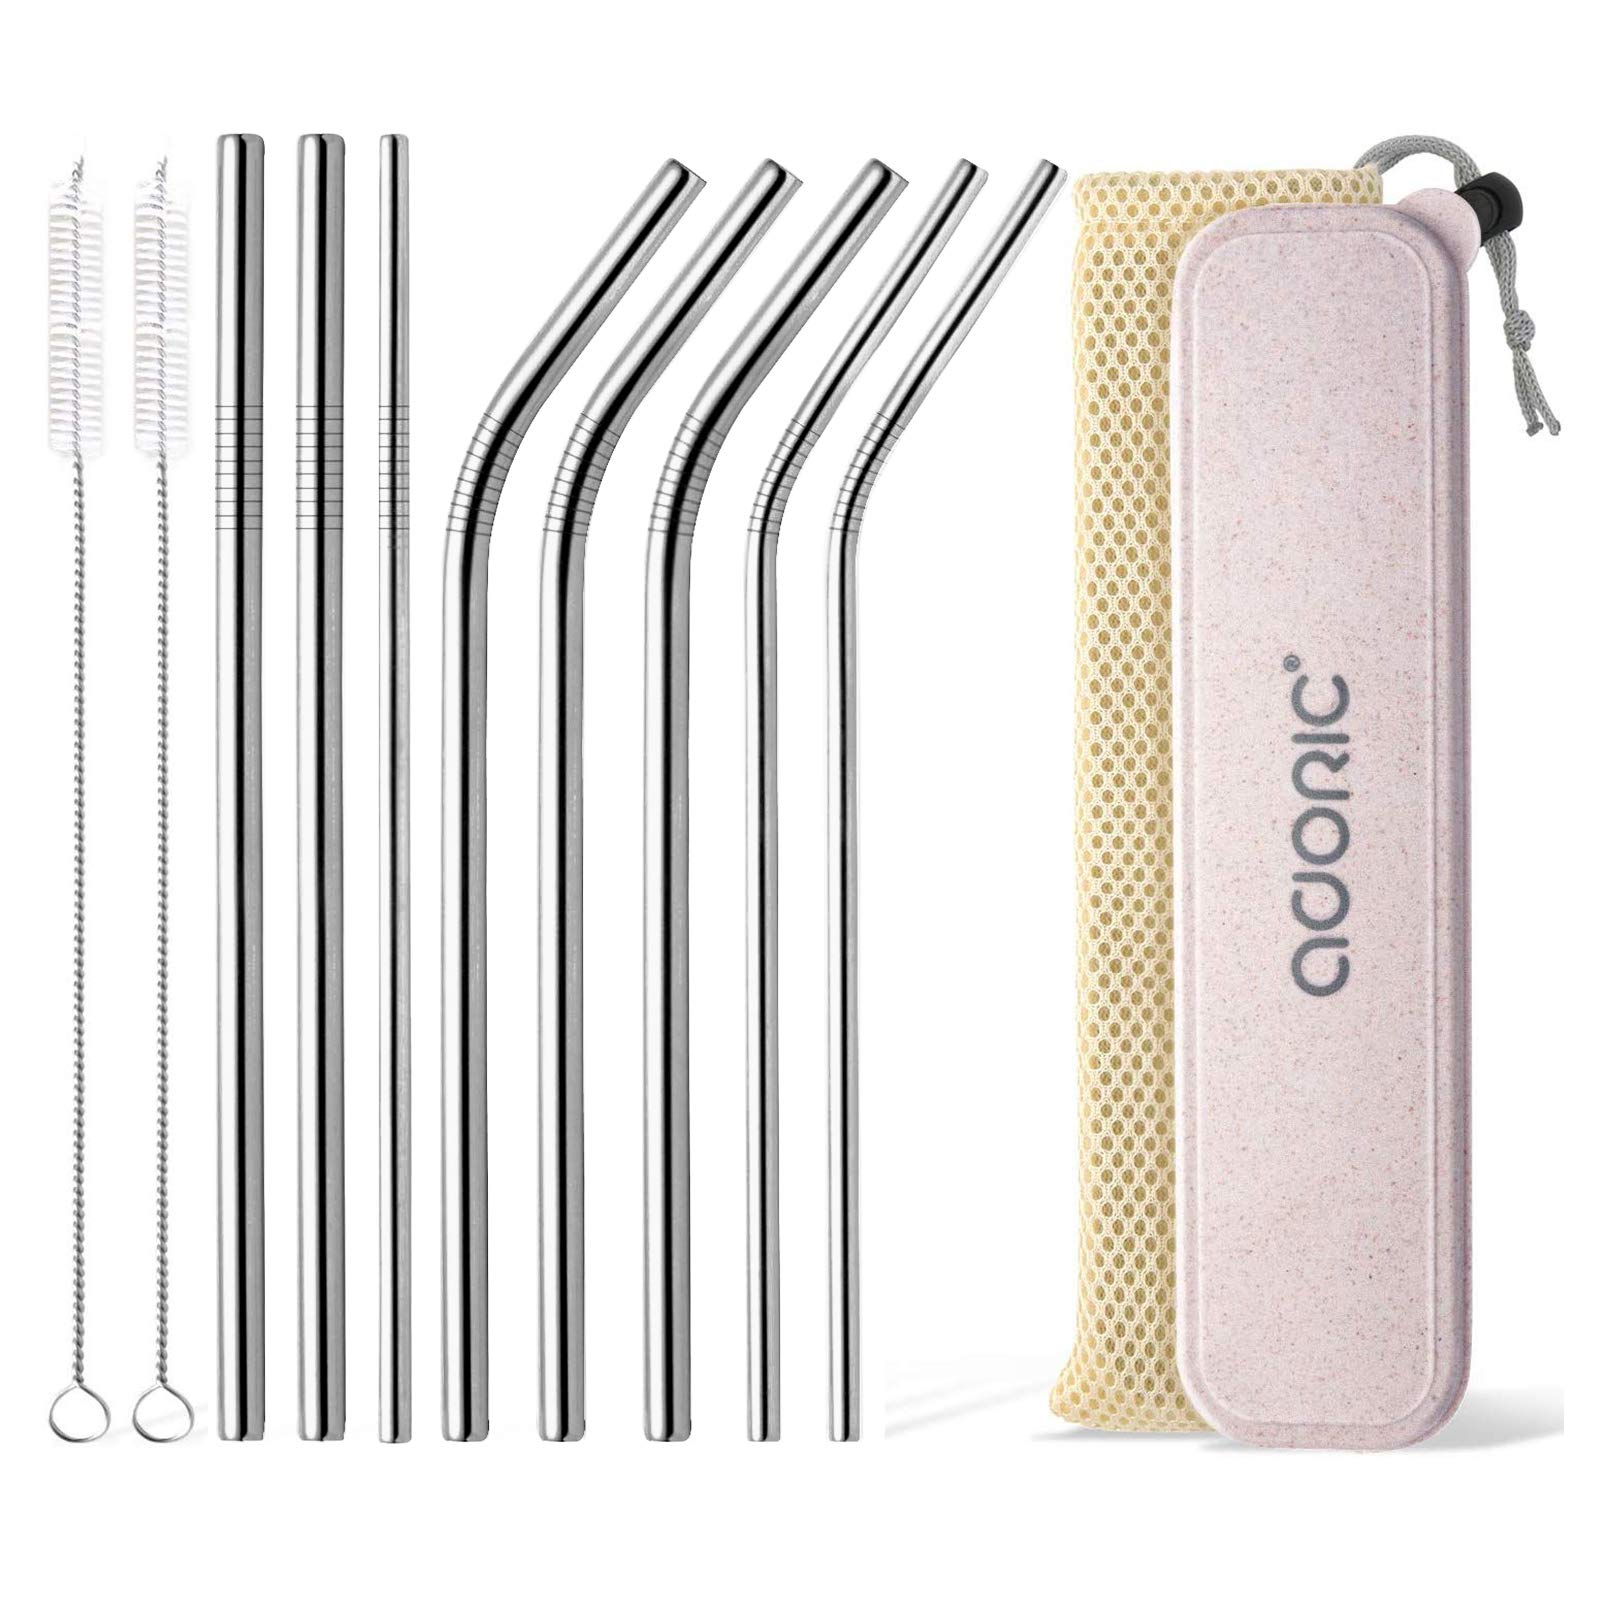 Reusable Straws with Case, Metal Straw Reusable Straws Drinking Straws Portable Eco Friendly Straight and Curved Stainless Steel Straws 8 Set with 2 Straw Cleaner